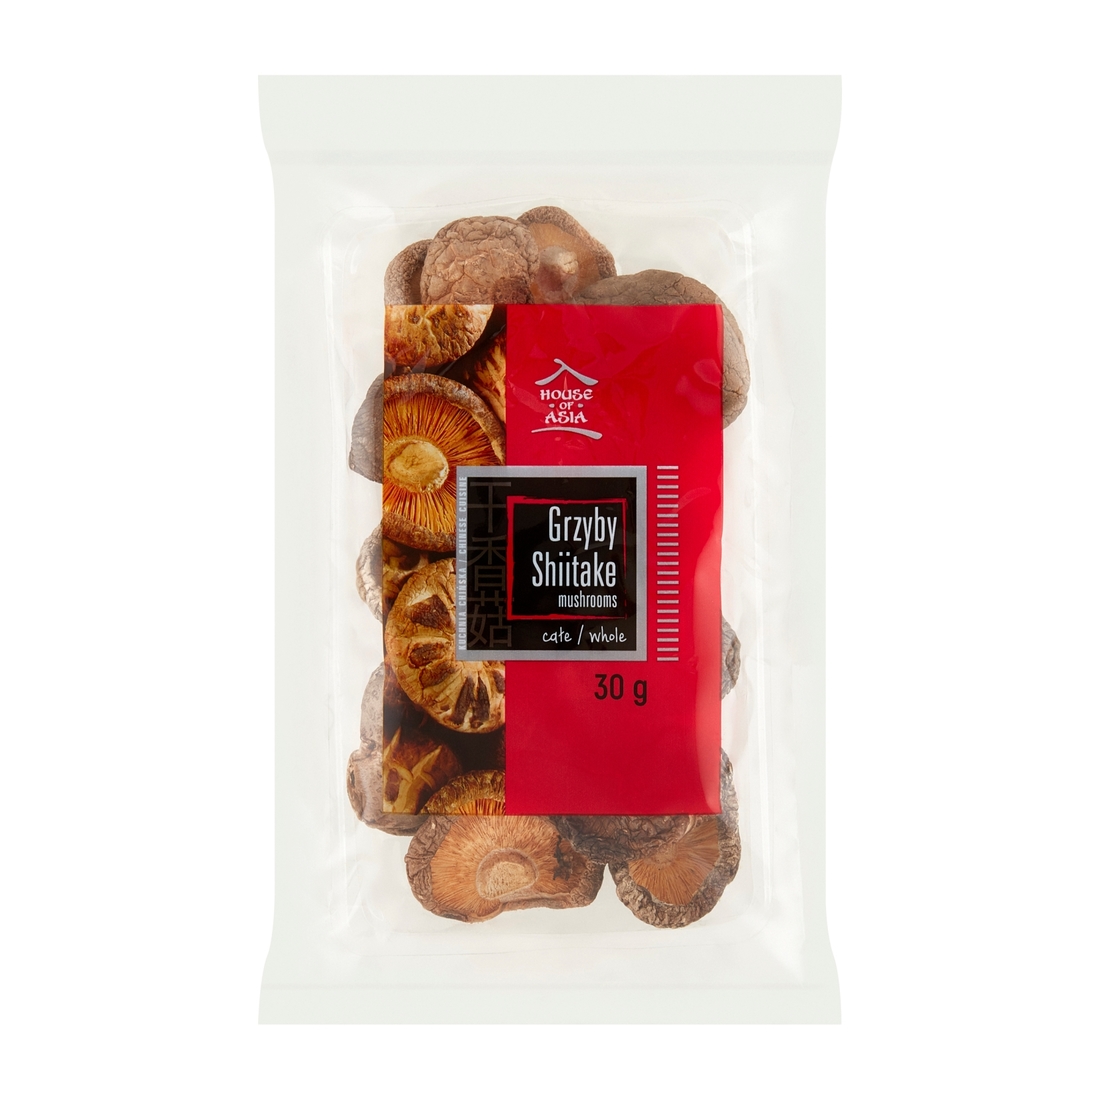 Grzyby Shiitake 30g House of Asia House of Asia